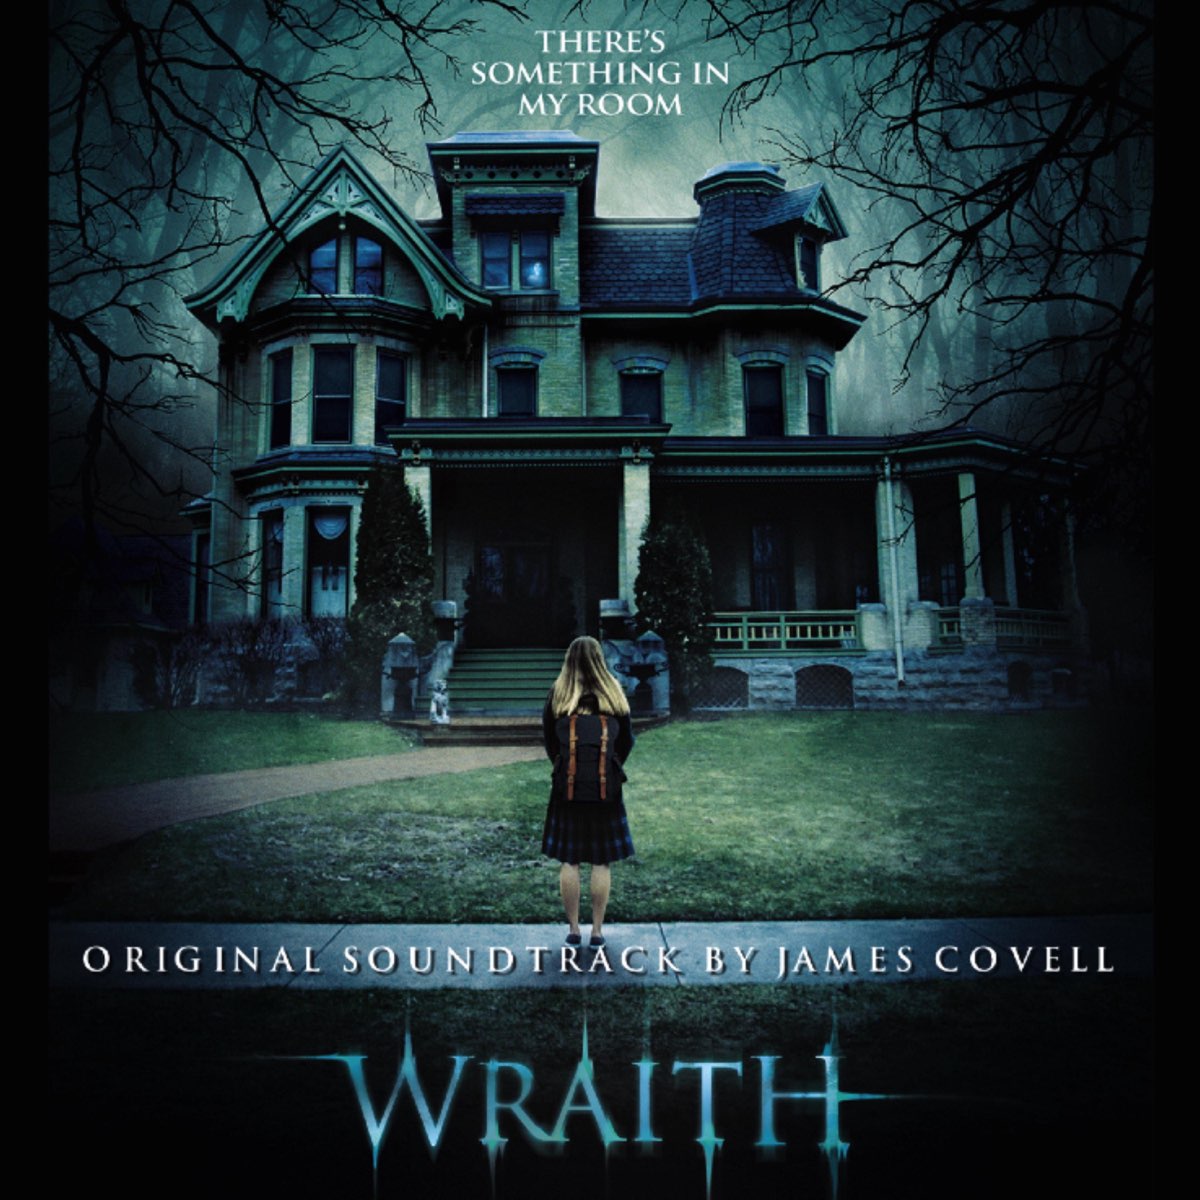 ‎Wraith (Original Soundtrack) by James Covell on Apple Music